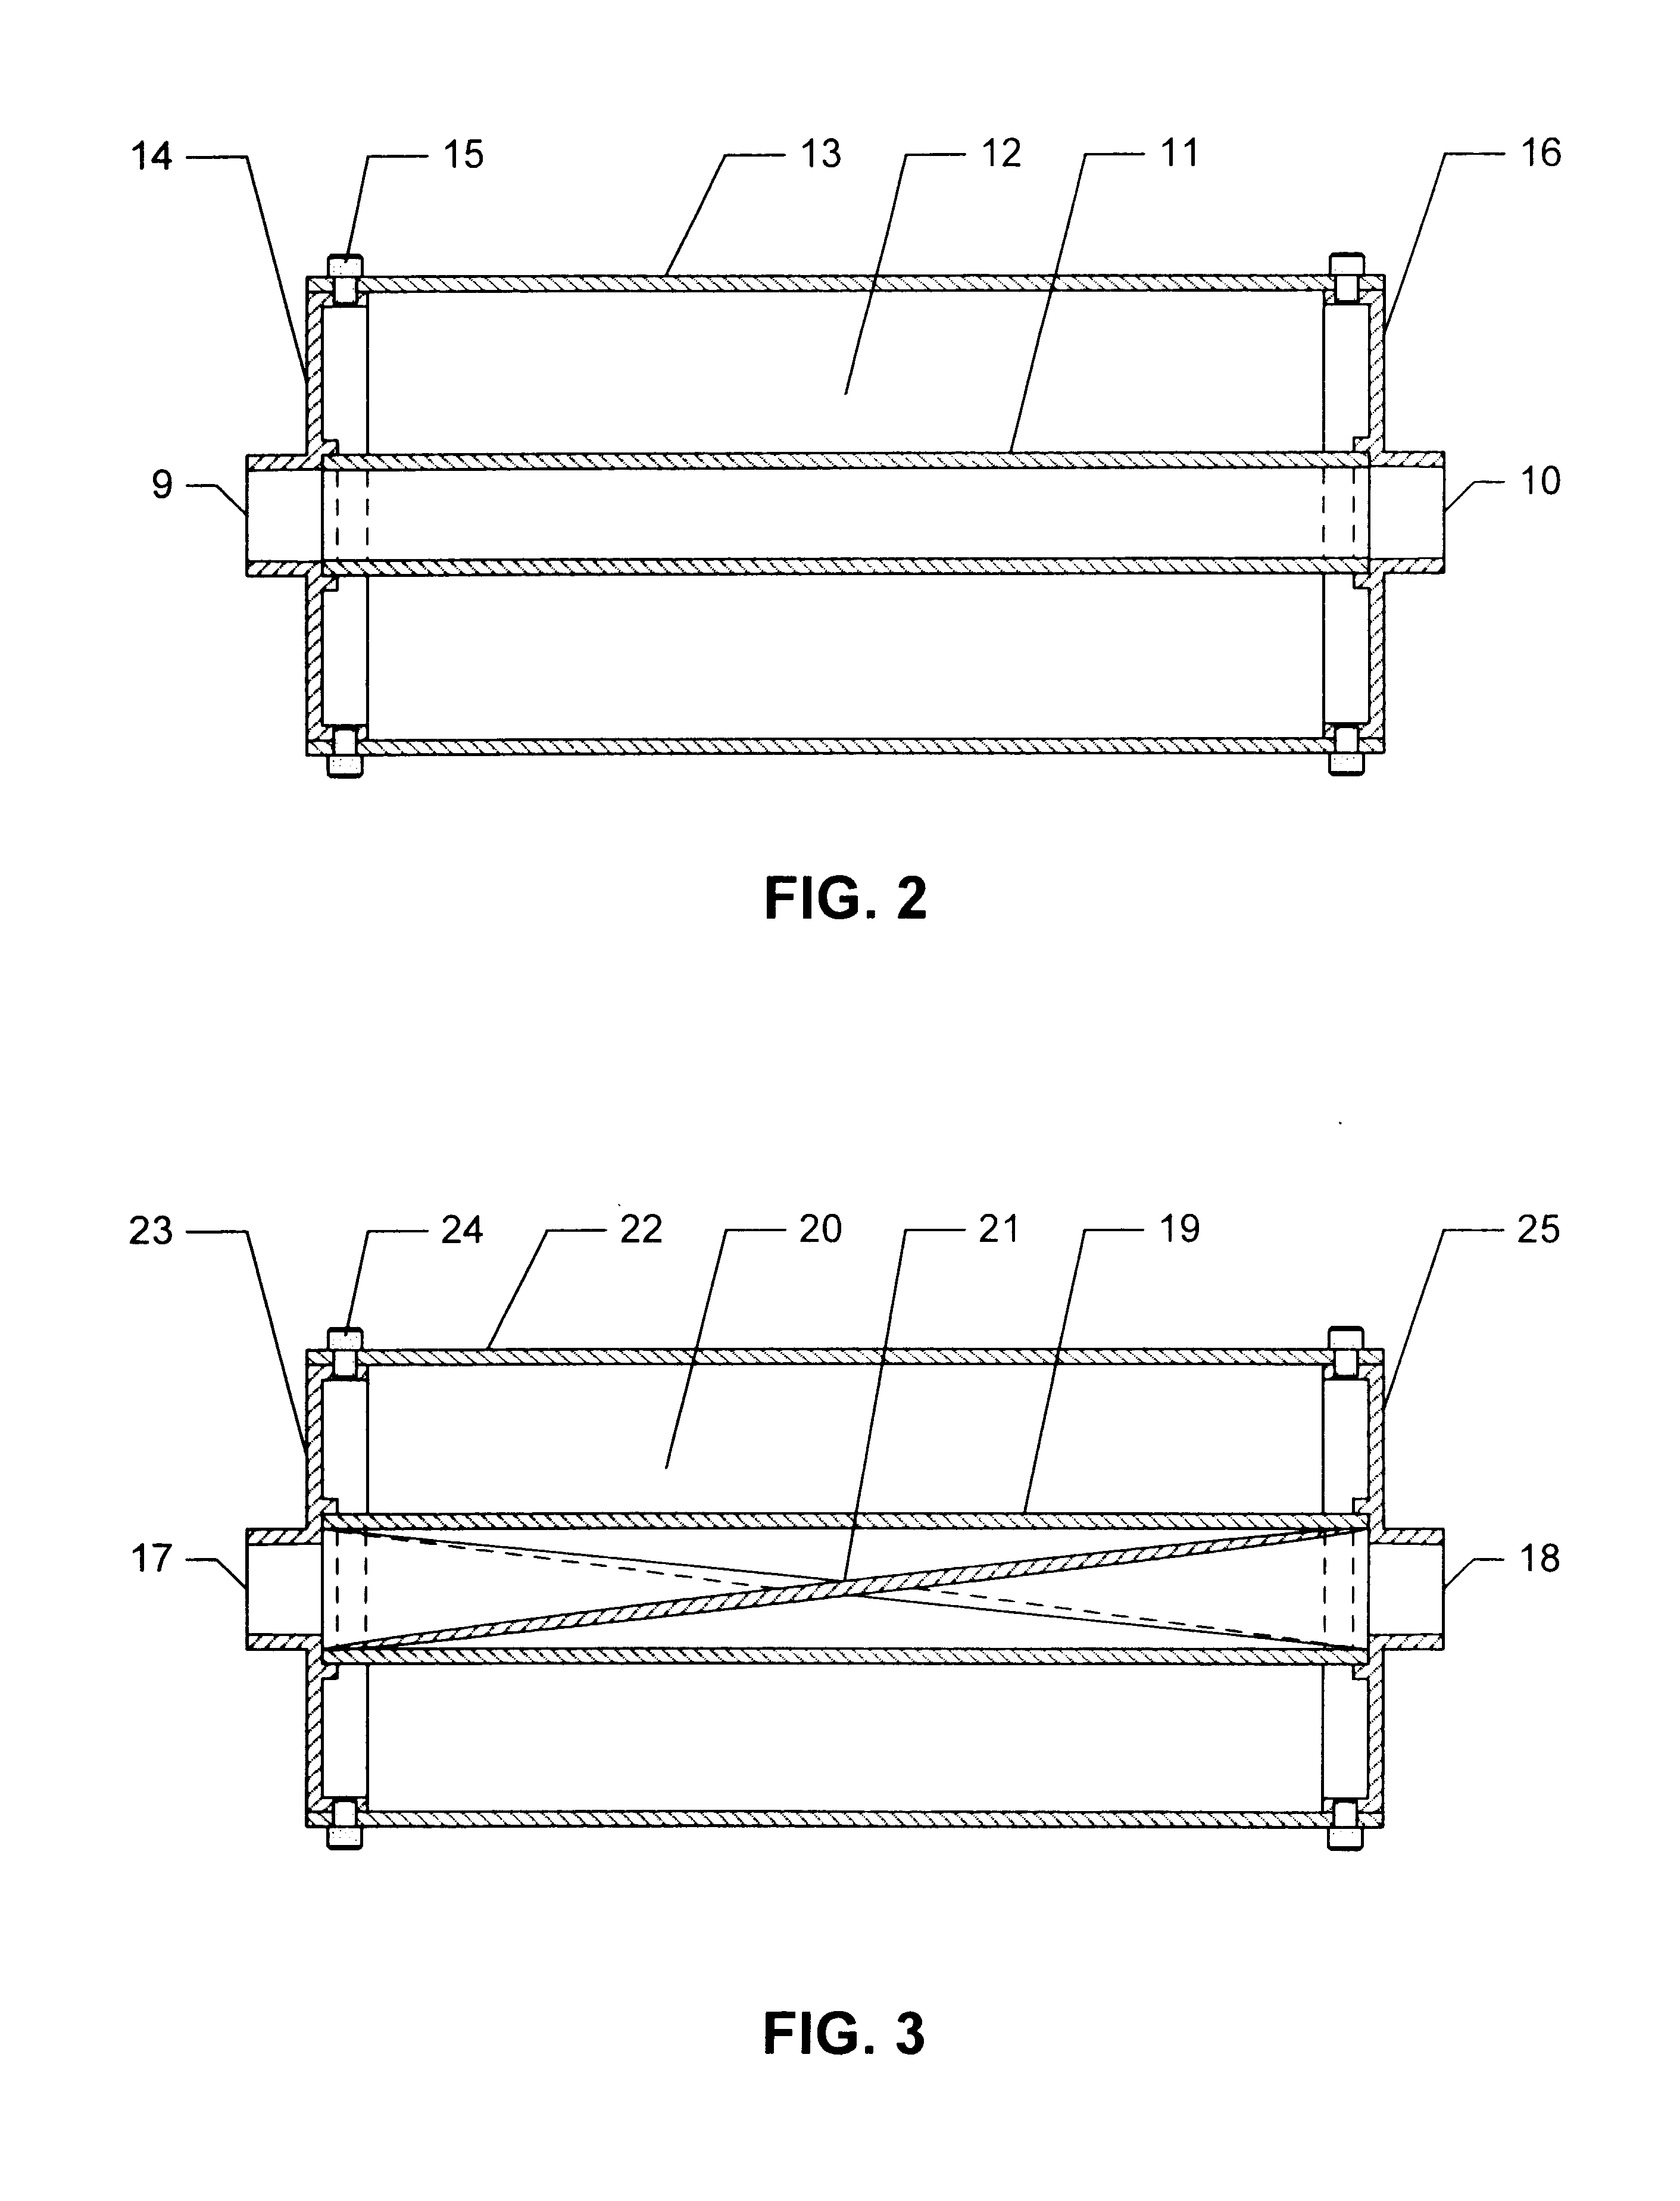 Method and apparatus for improved noise attenuation in a dissipative internal combustion engine exhaust muffler